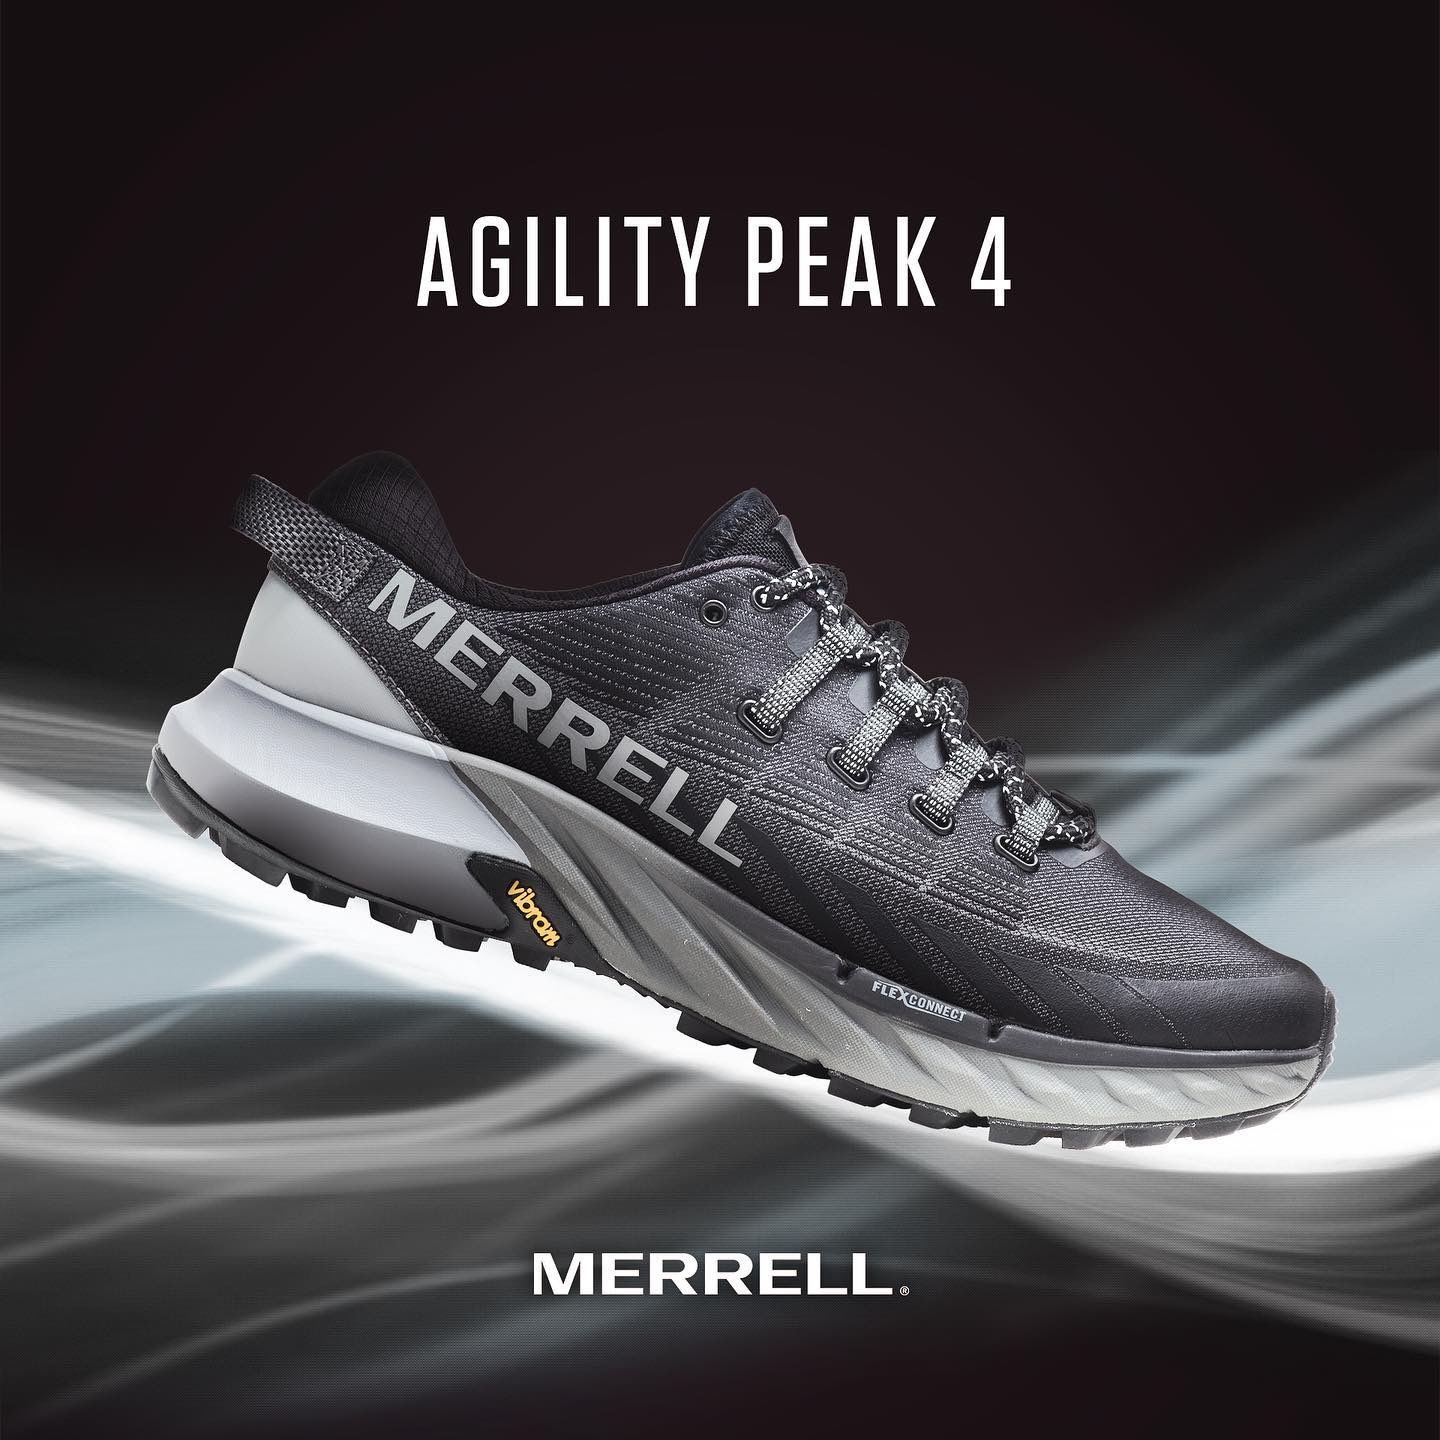 Merrell on X: "Introducing the Agility Peak 4. This shoe is our grippiest trail running shoe designed for those who want a lot of protection on even the most rugged